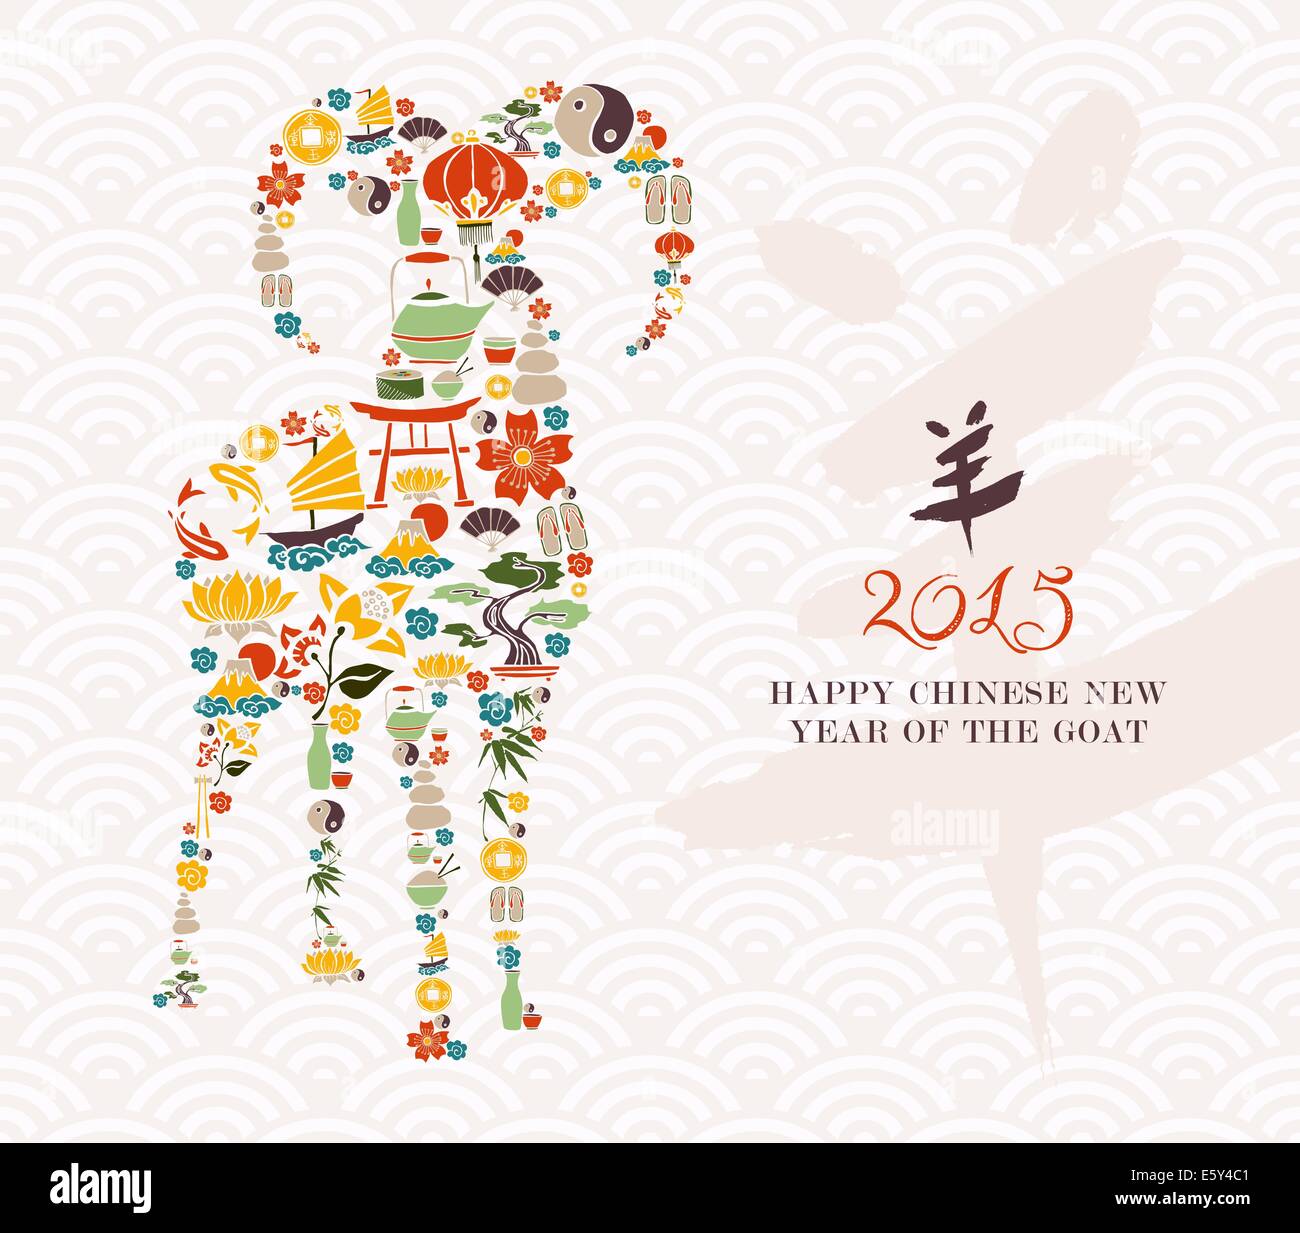 2015 Chinese New Year of the Goat eastern elements composition. EPS10 vector file organized in layers for easy editing. Stock Photo